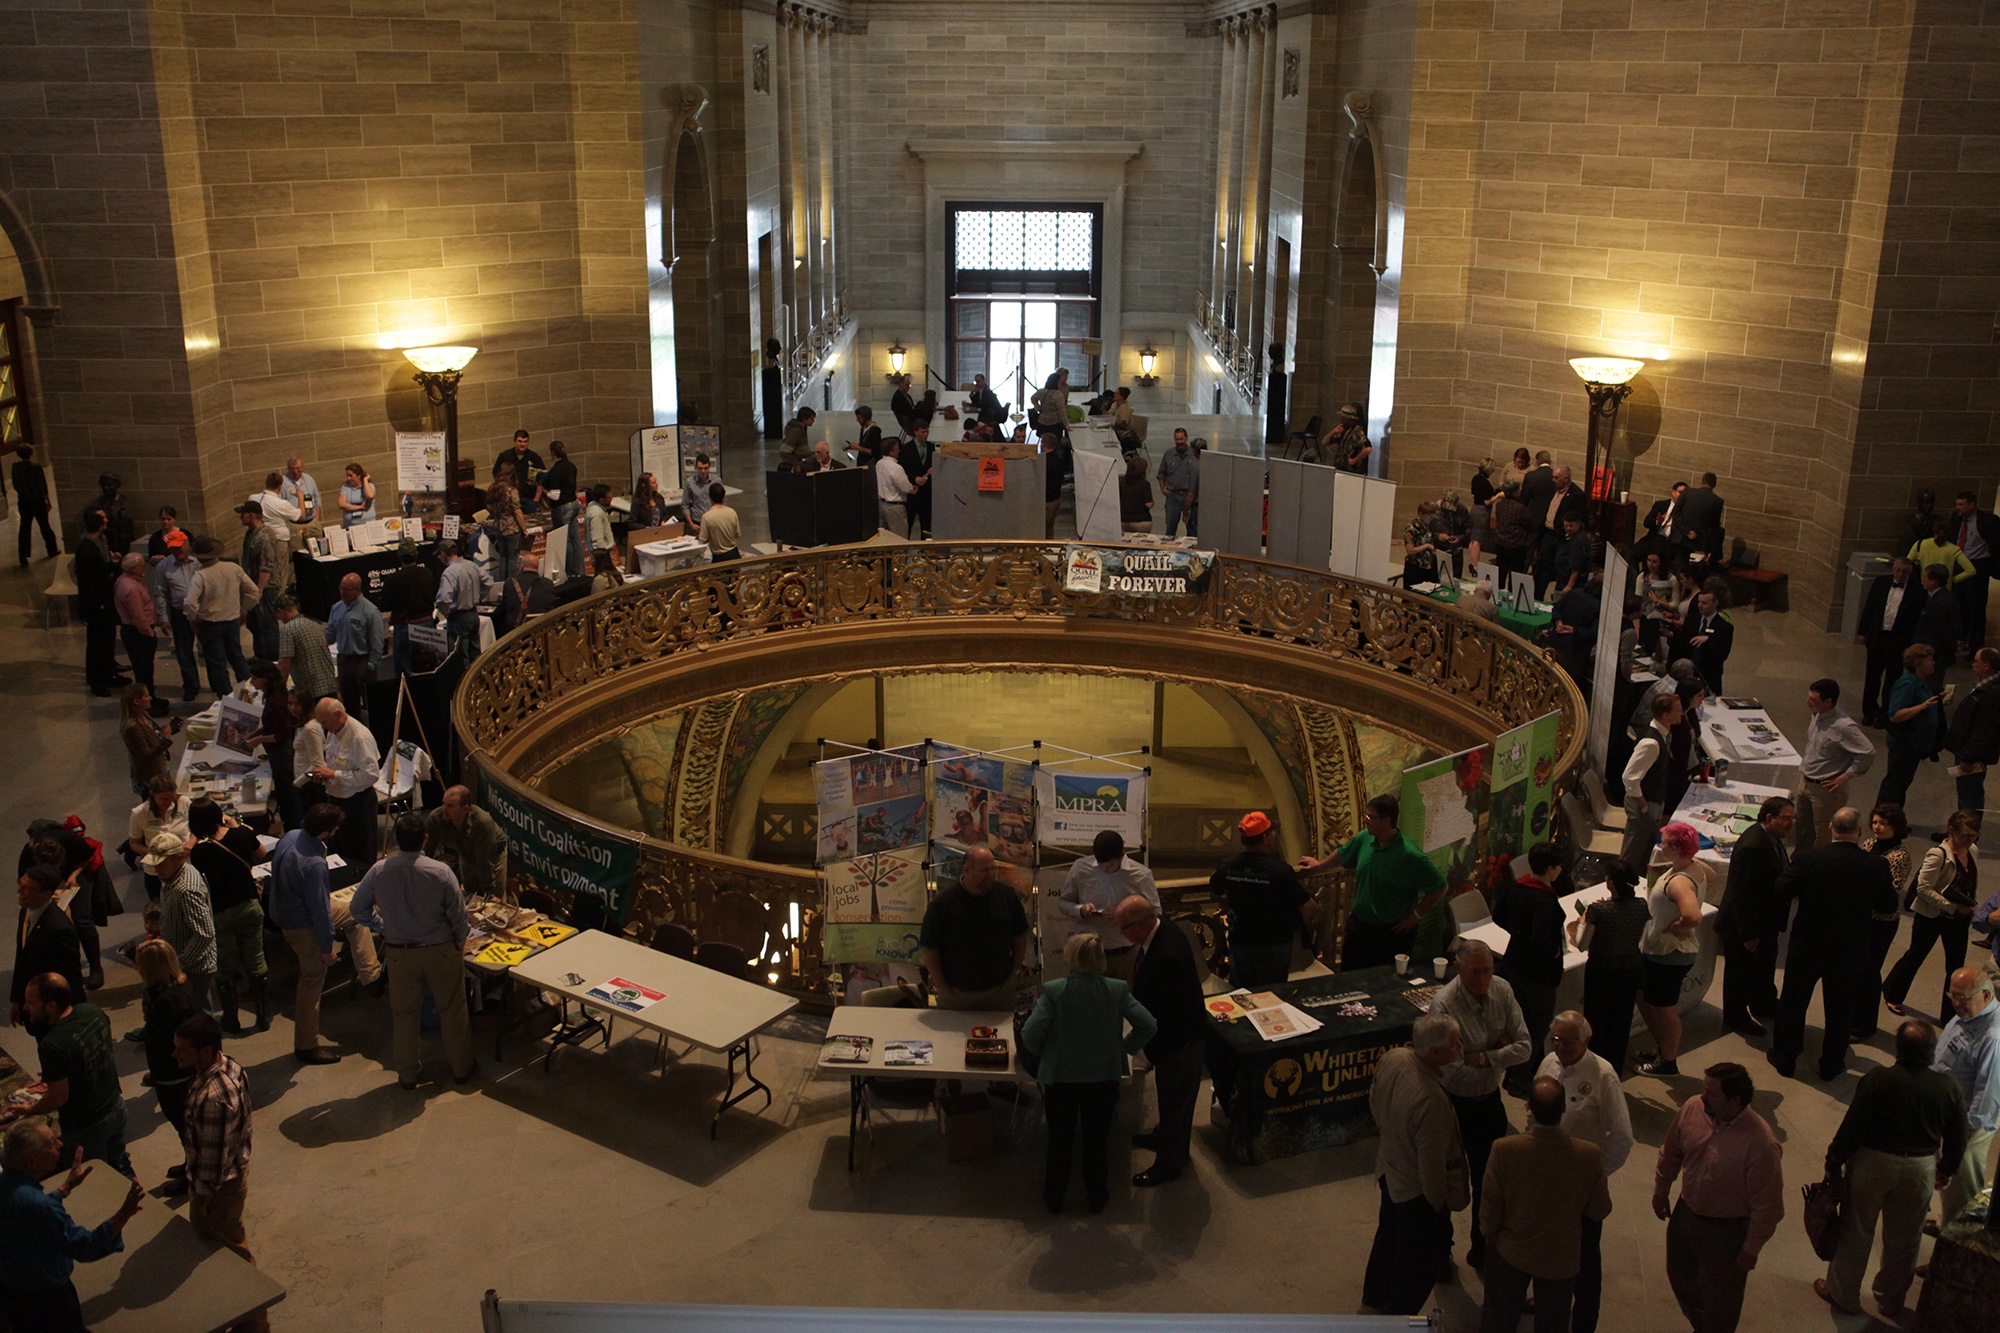 On April 12, Conservation Day at the Capitol will bring together hundreds of conservationists at the State Capitol from around Missouri.